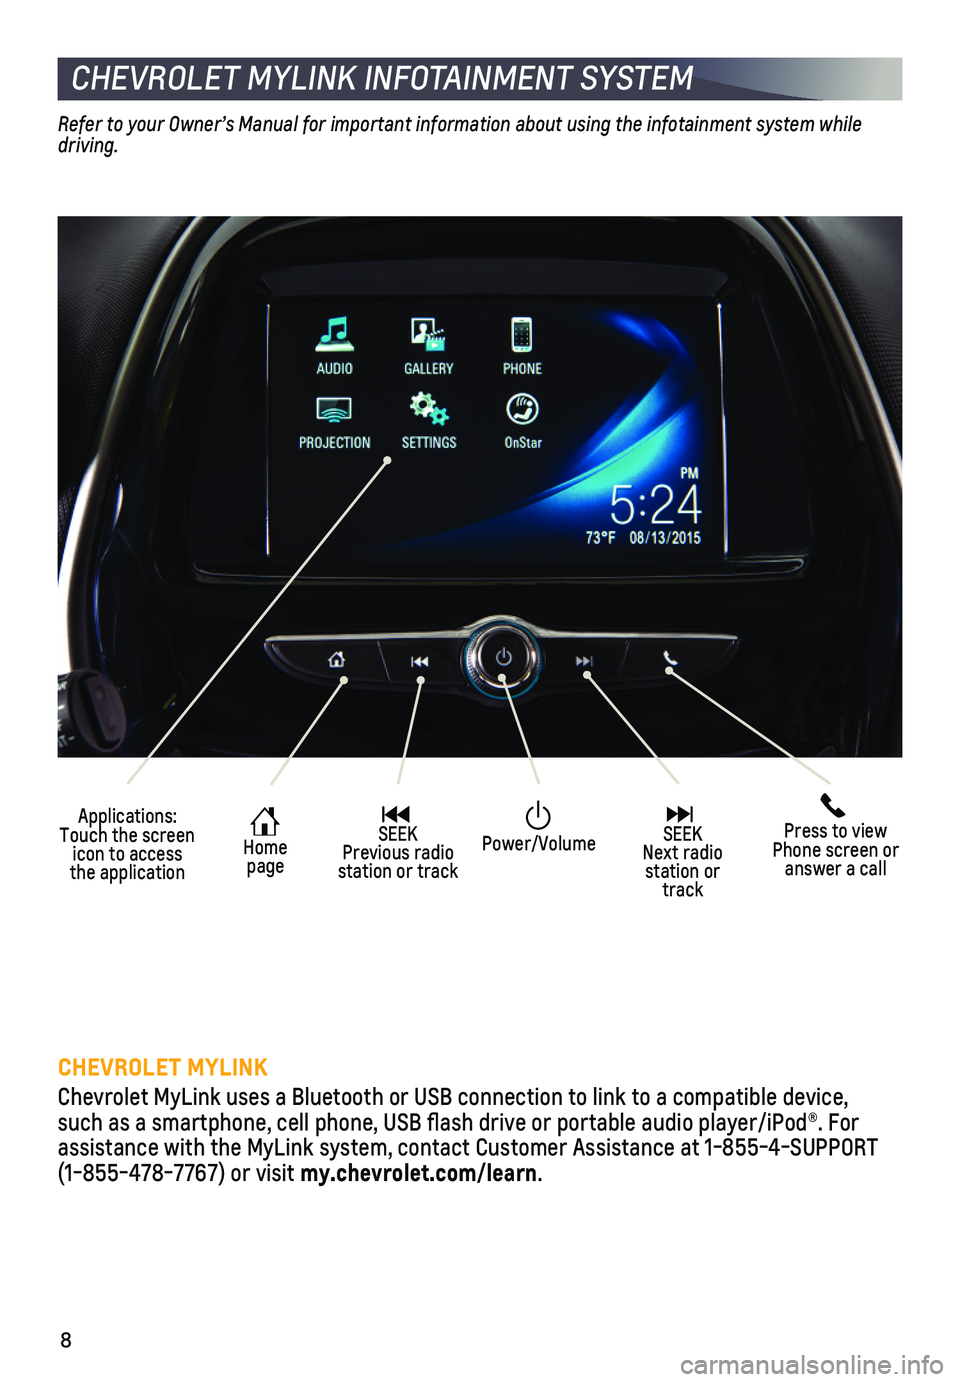 CHEVROLET SPARK 2018  Get To Know Guide 8
CHEVROLET MYLINK INFOTAINMENT SYSTEM
Applications: Touch the screen icon to access the application
 Home  page
 SEEK Previous radio station or track
 Press to view Phone screen or answer a call
  SE